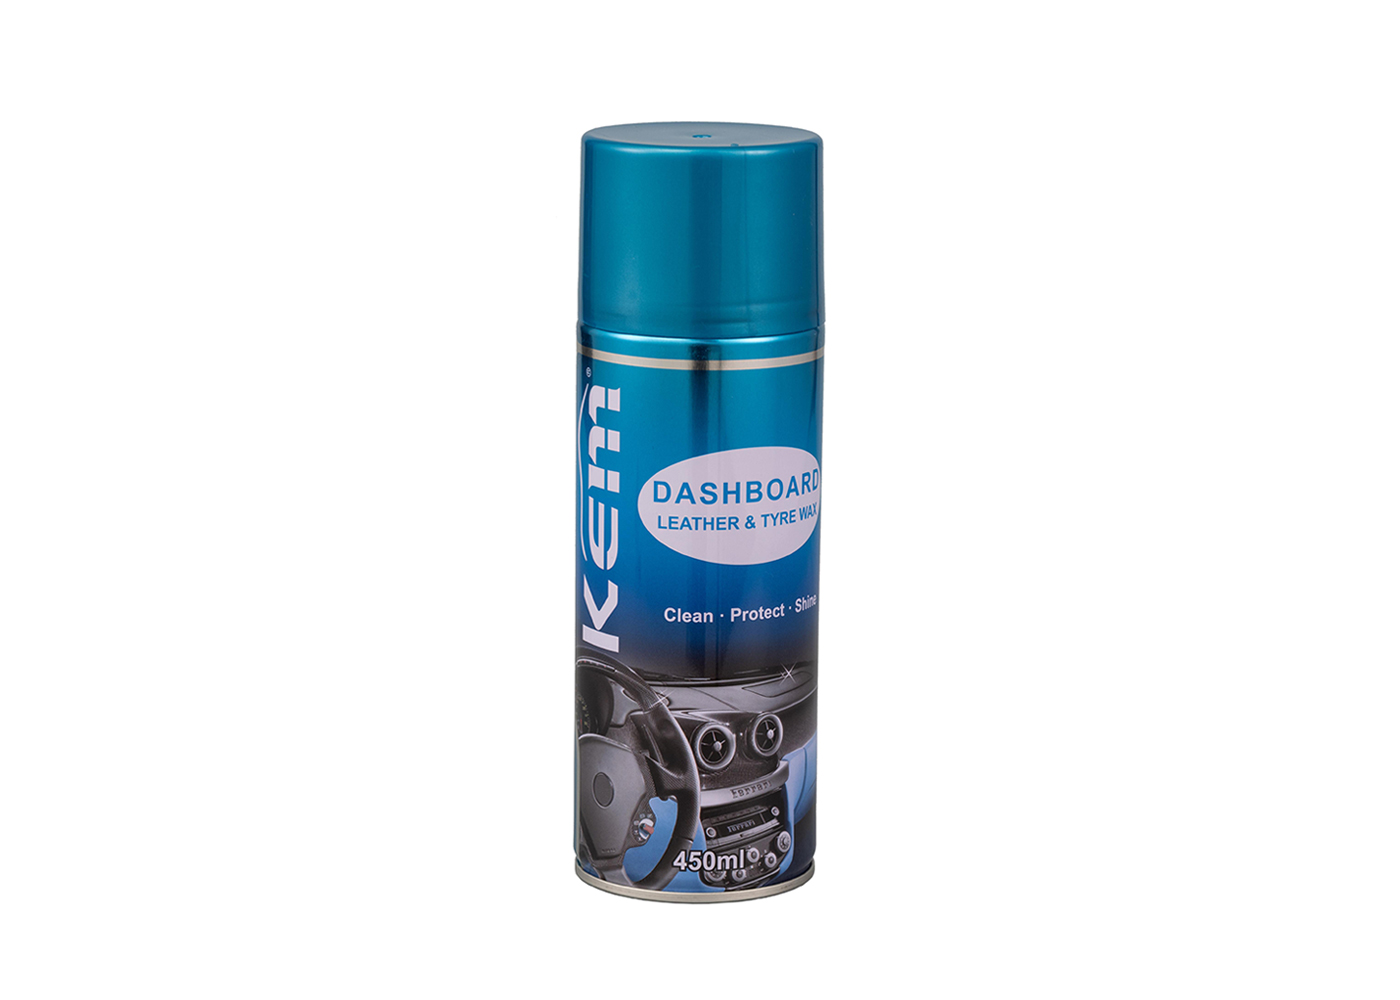 Dashboard leather & tyre wax